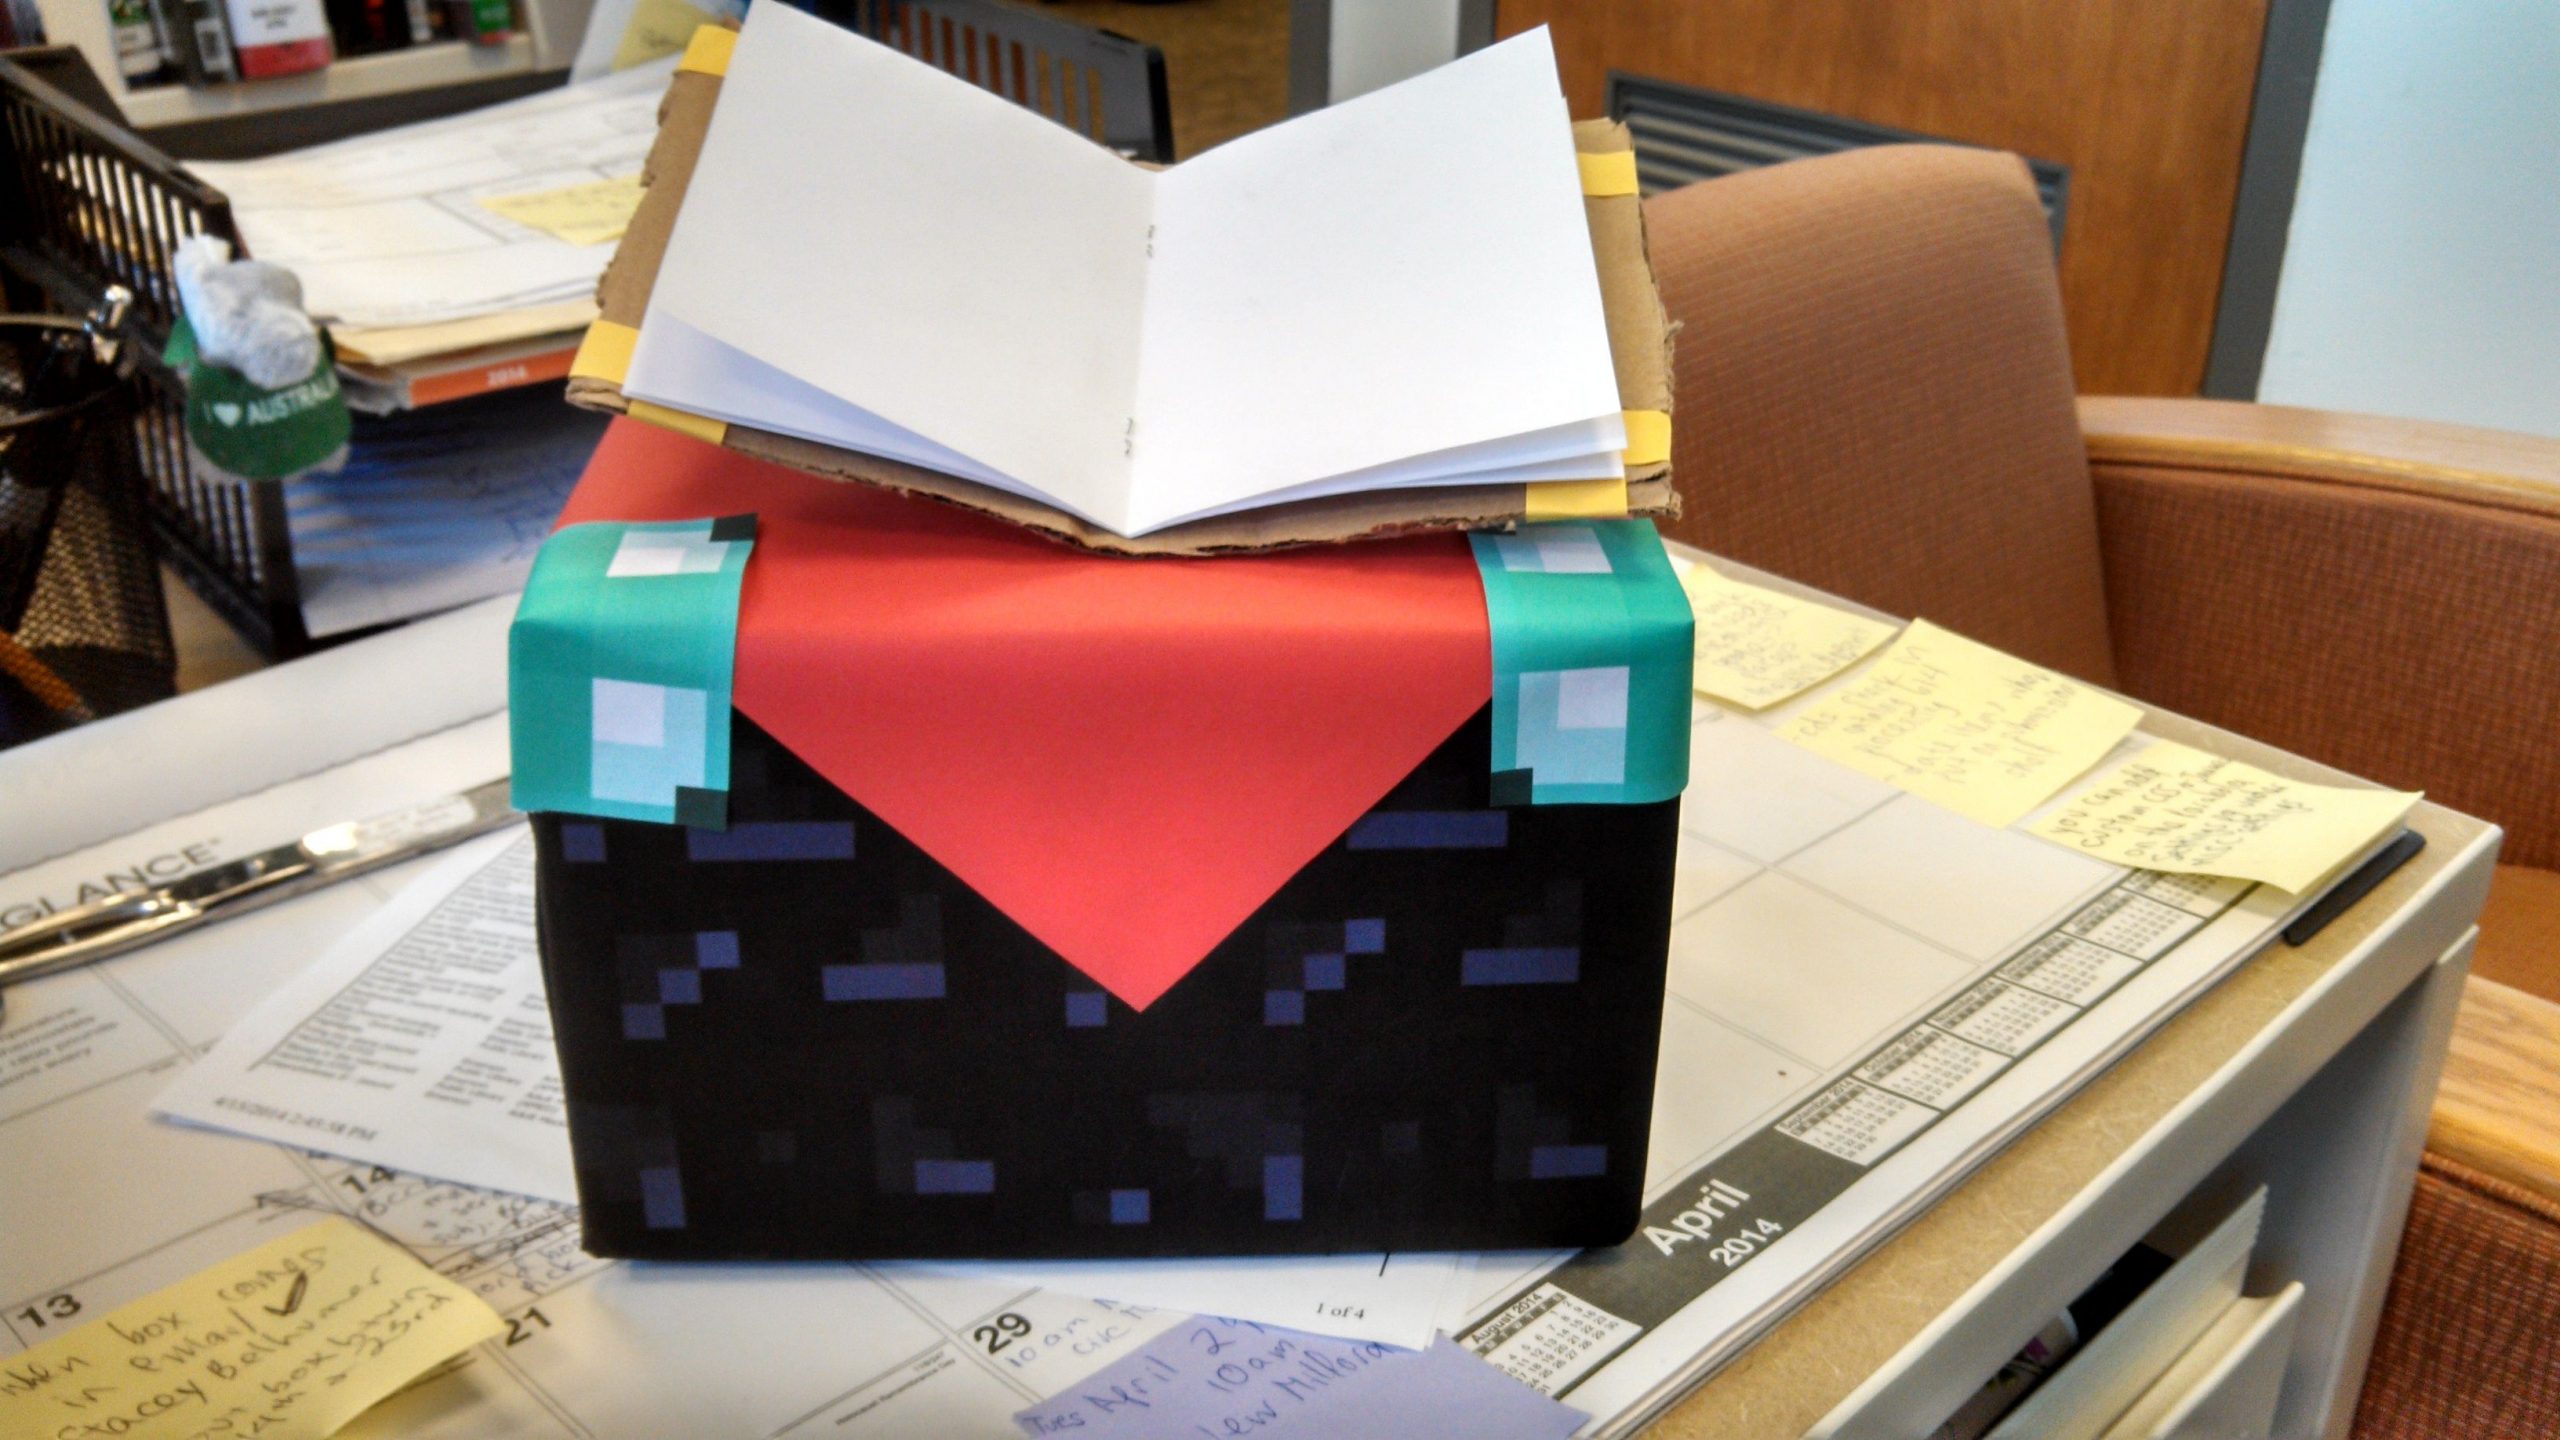 Diy Enchanting Table From The Video Game Minecraft Using A